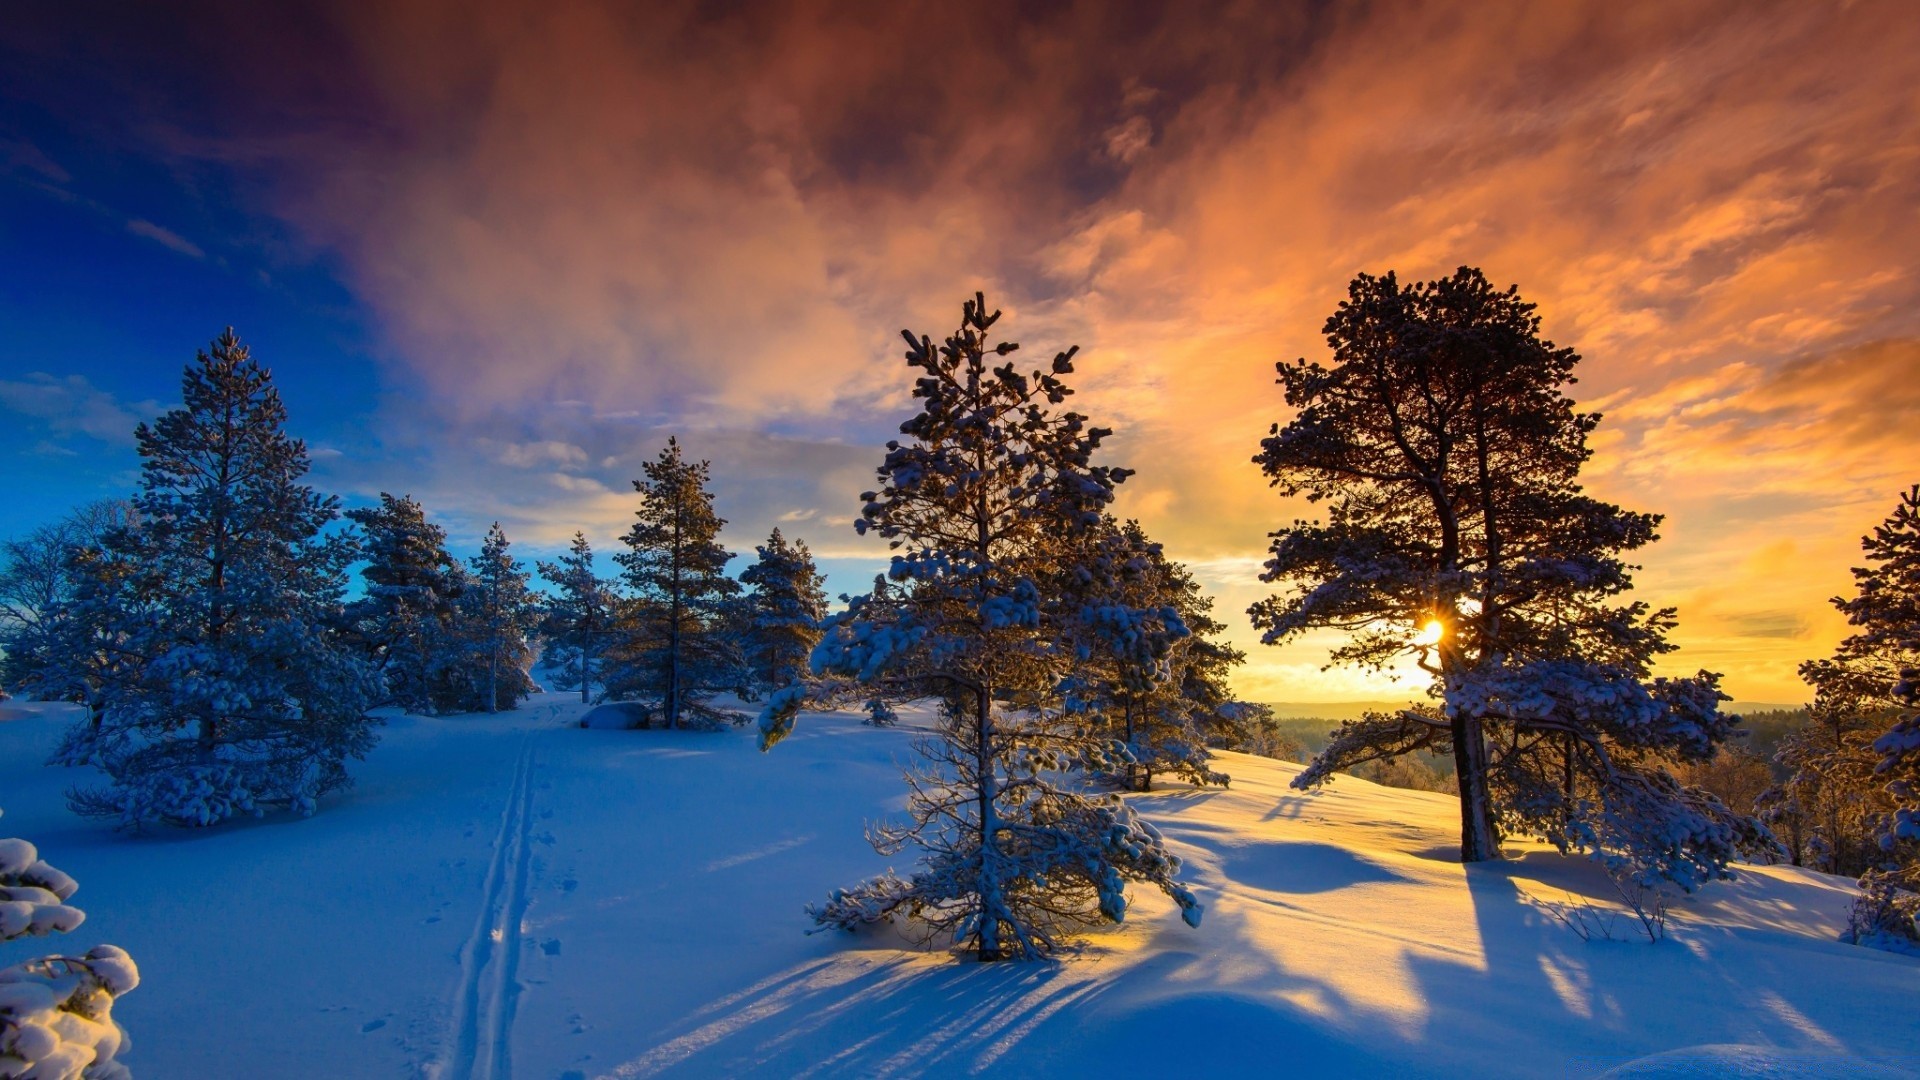 winter snow tree wood landscape outdoors dawn nature fair weather scenic cold sky evergreen frost sunset evening conifer placid